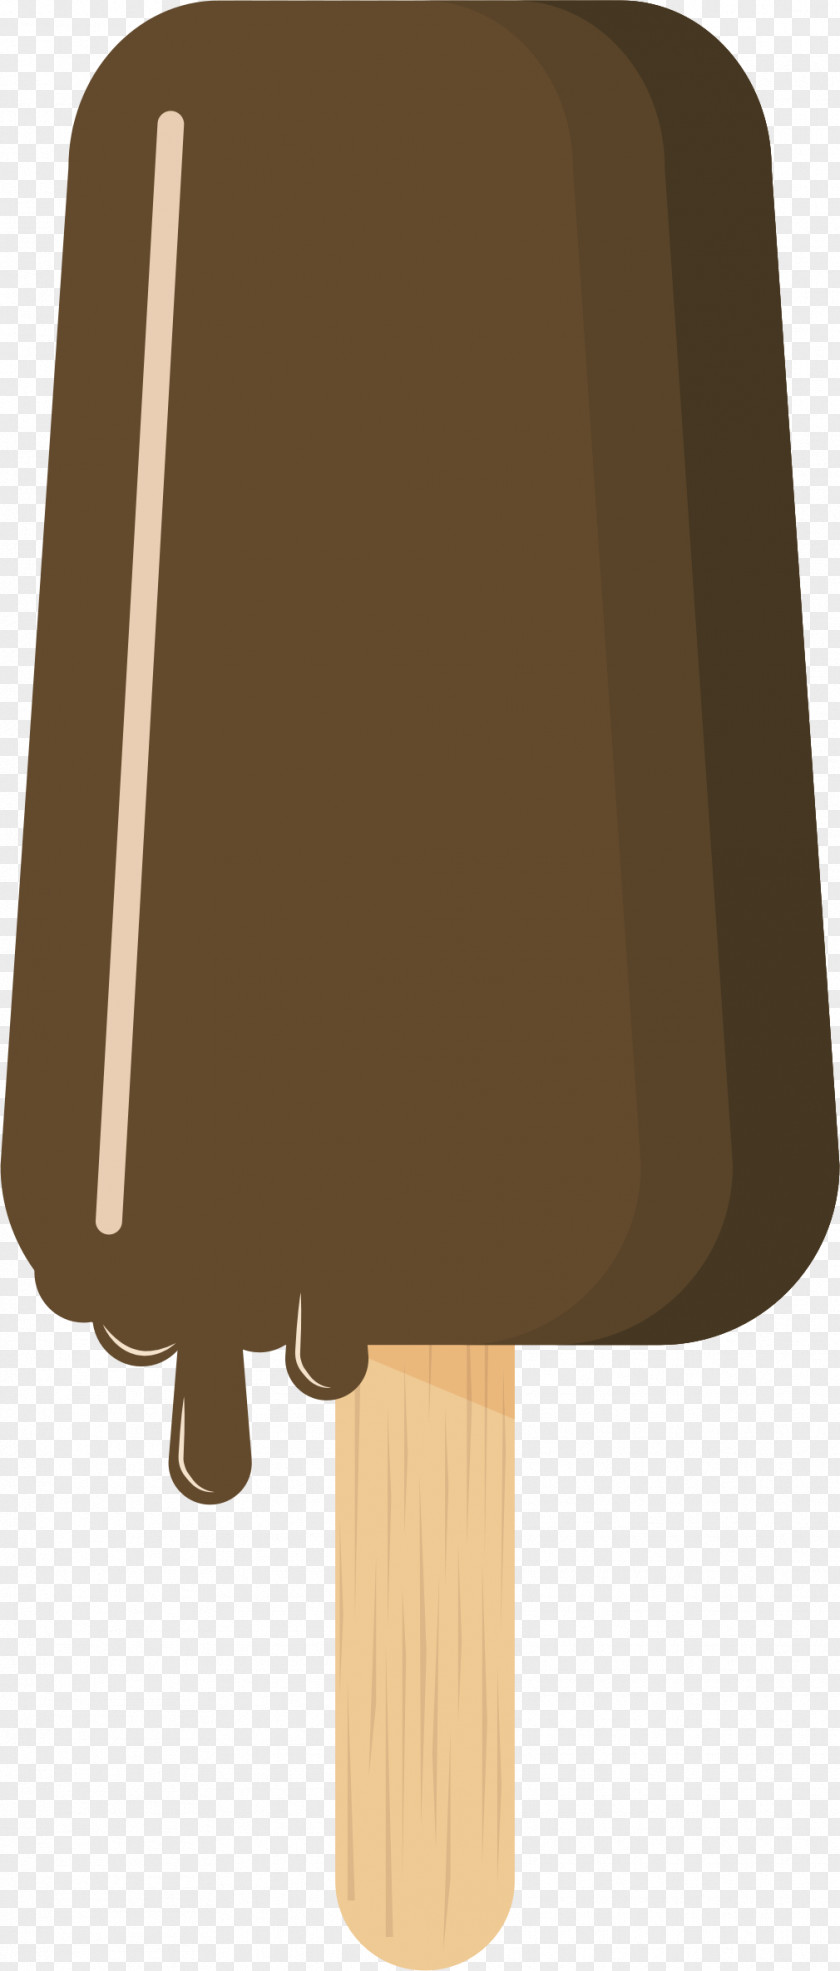 Melted Ice Cream Confectionery Frozen Food Clip Art Chocolate Bar PNG